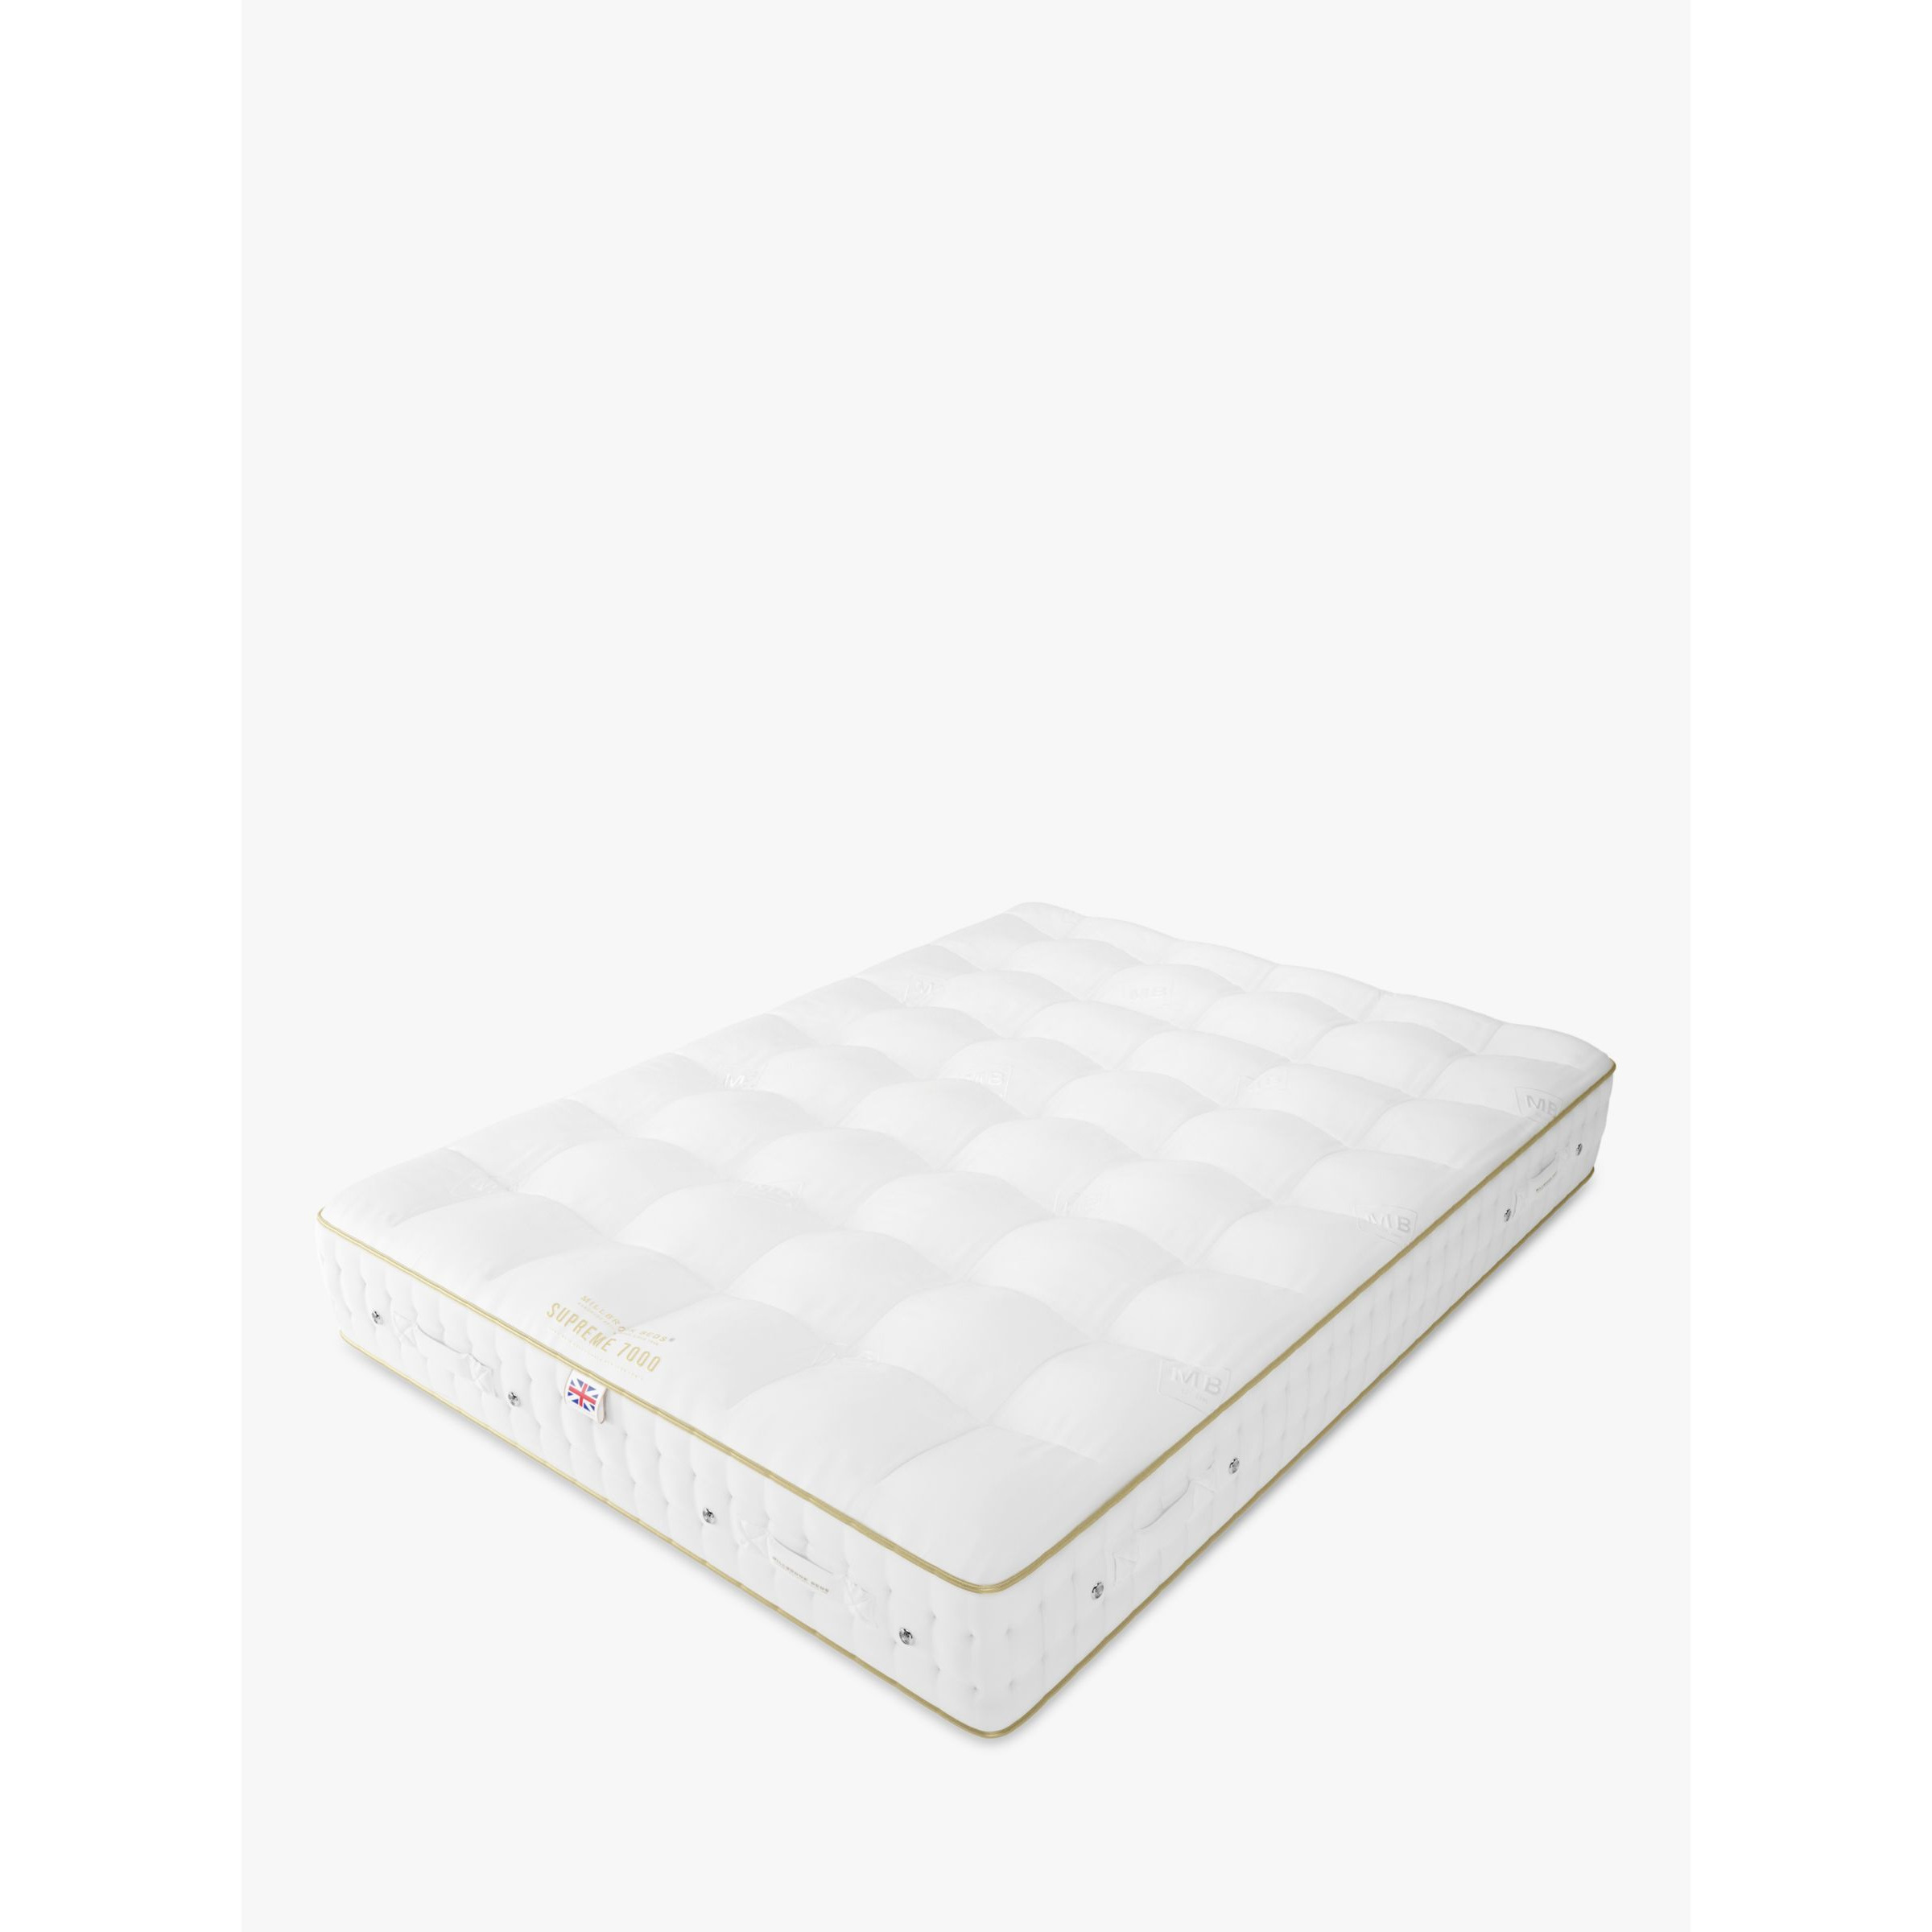 Millbrook Beds Supreme Collection 7000 Mattress, Firm Tension, King Size - image 1